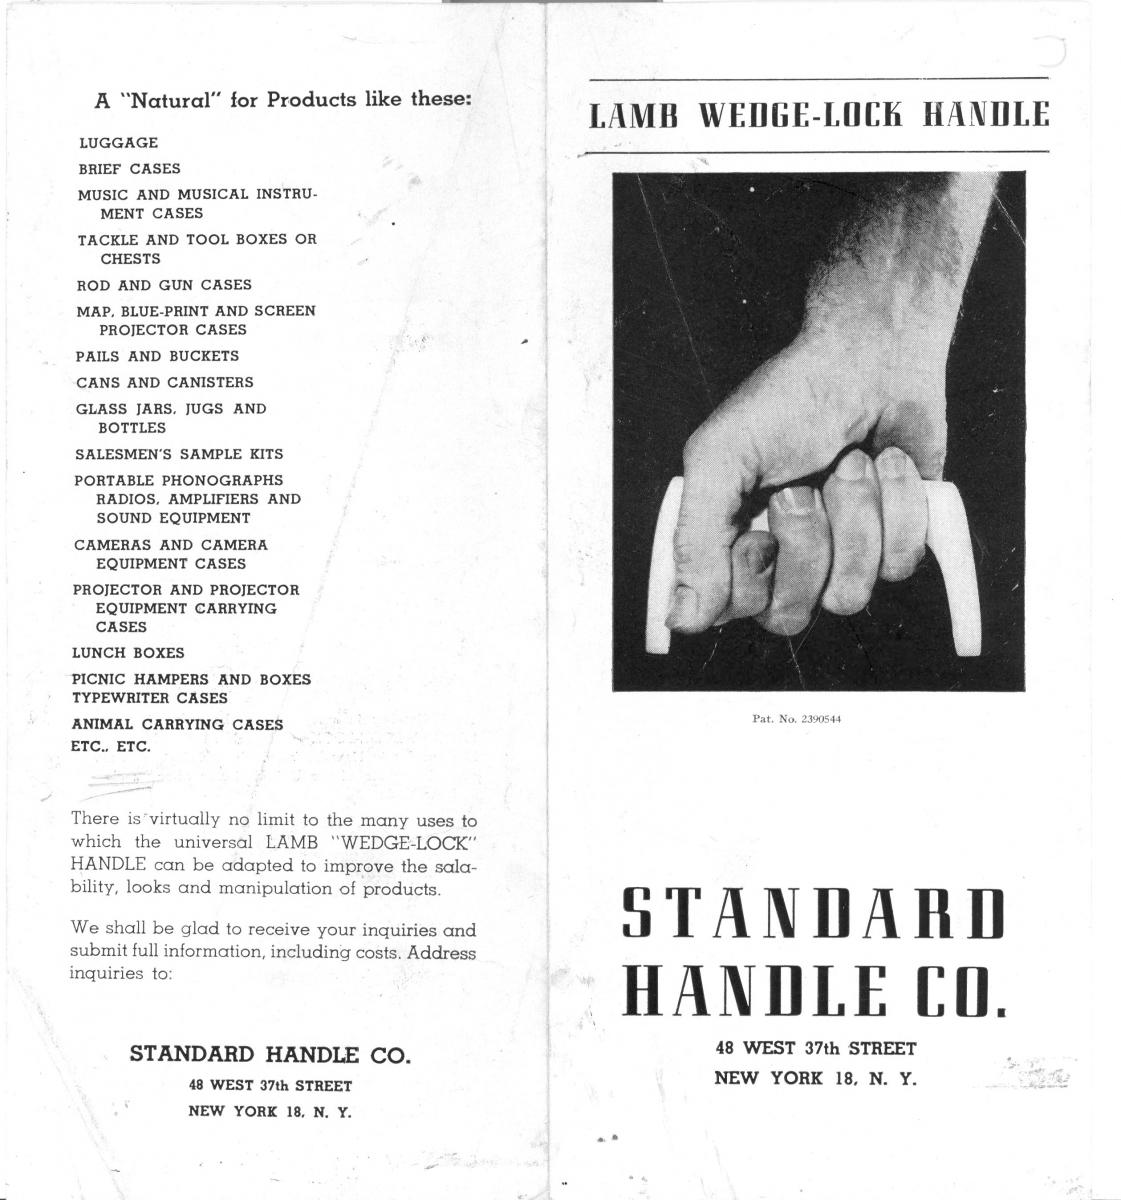 A brochure details that many ways the Wedge-Lock handle can be used with an illustration of someone gripping the handle.